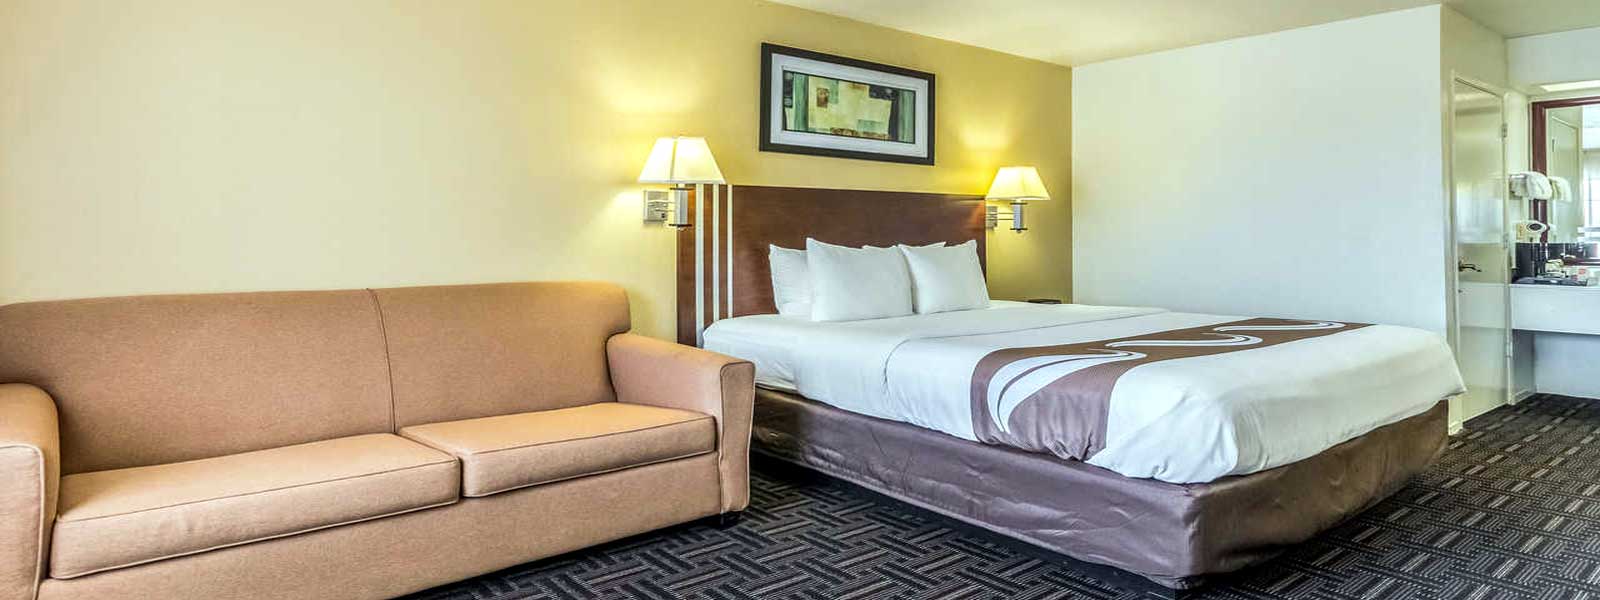 Motels in Fresno Budget Discount 3 Star Rating 